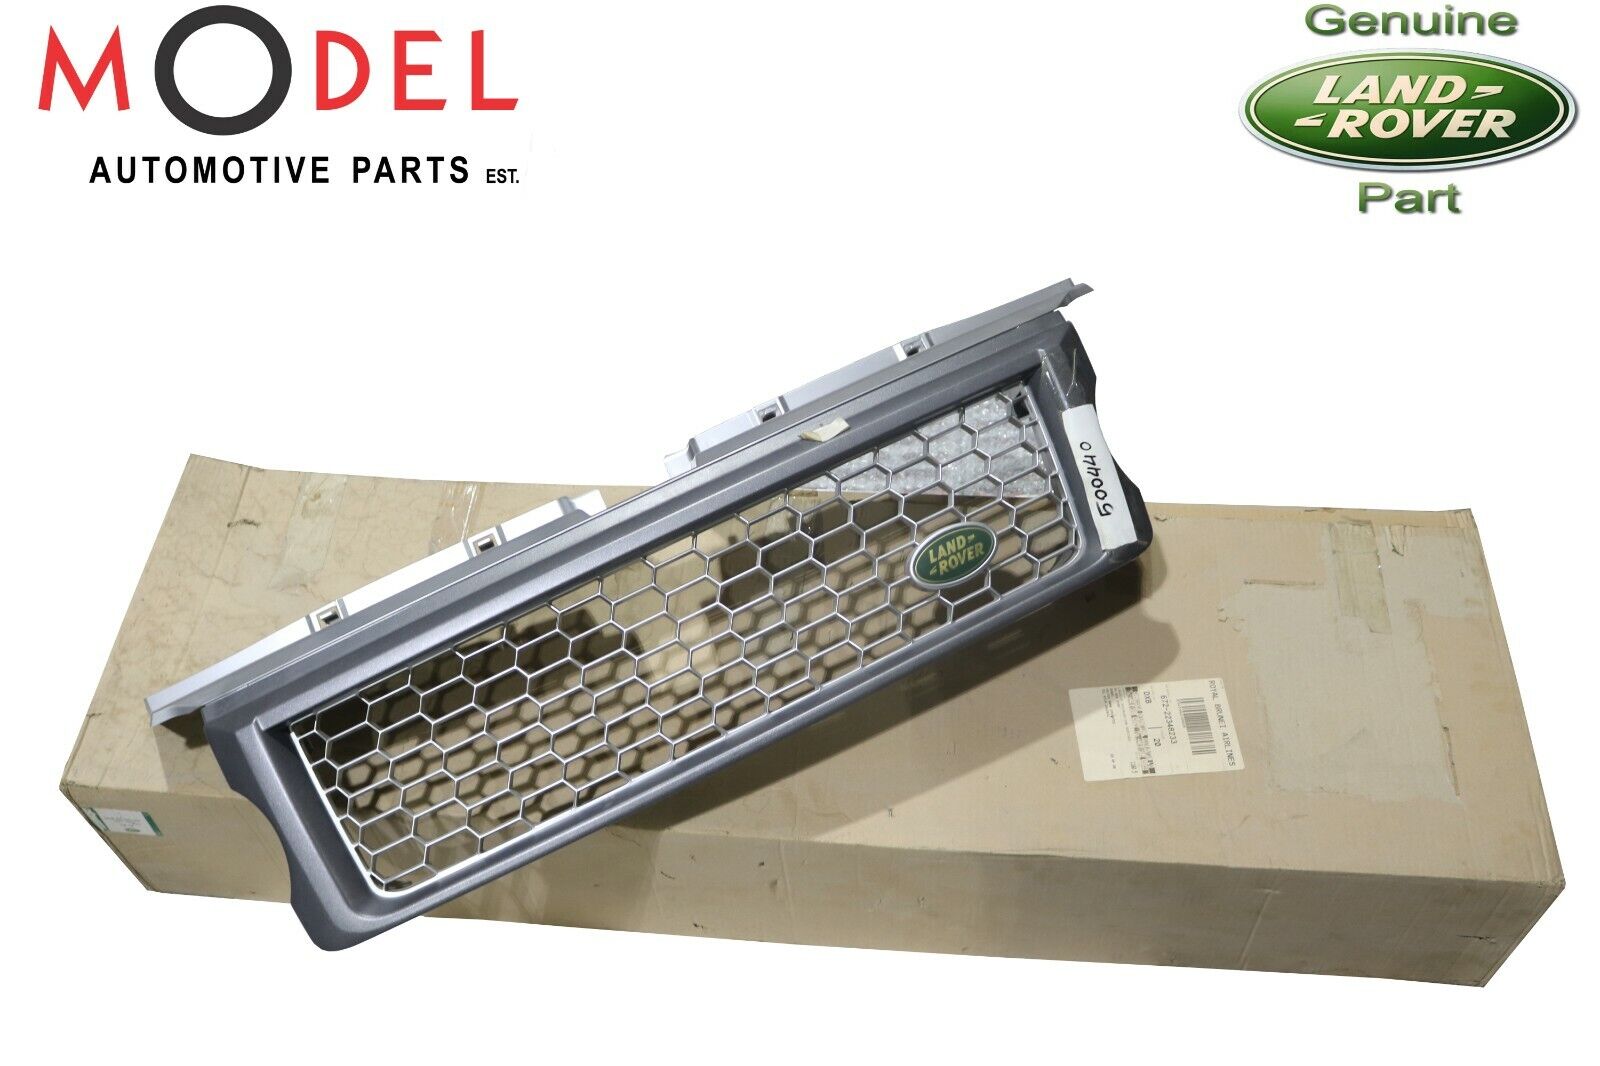 LAND ROVER RANGE ROVER Genuine Front Grill Sport 2006-09 DHB500440LEP